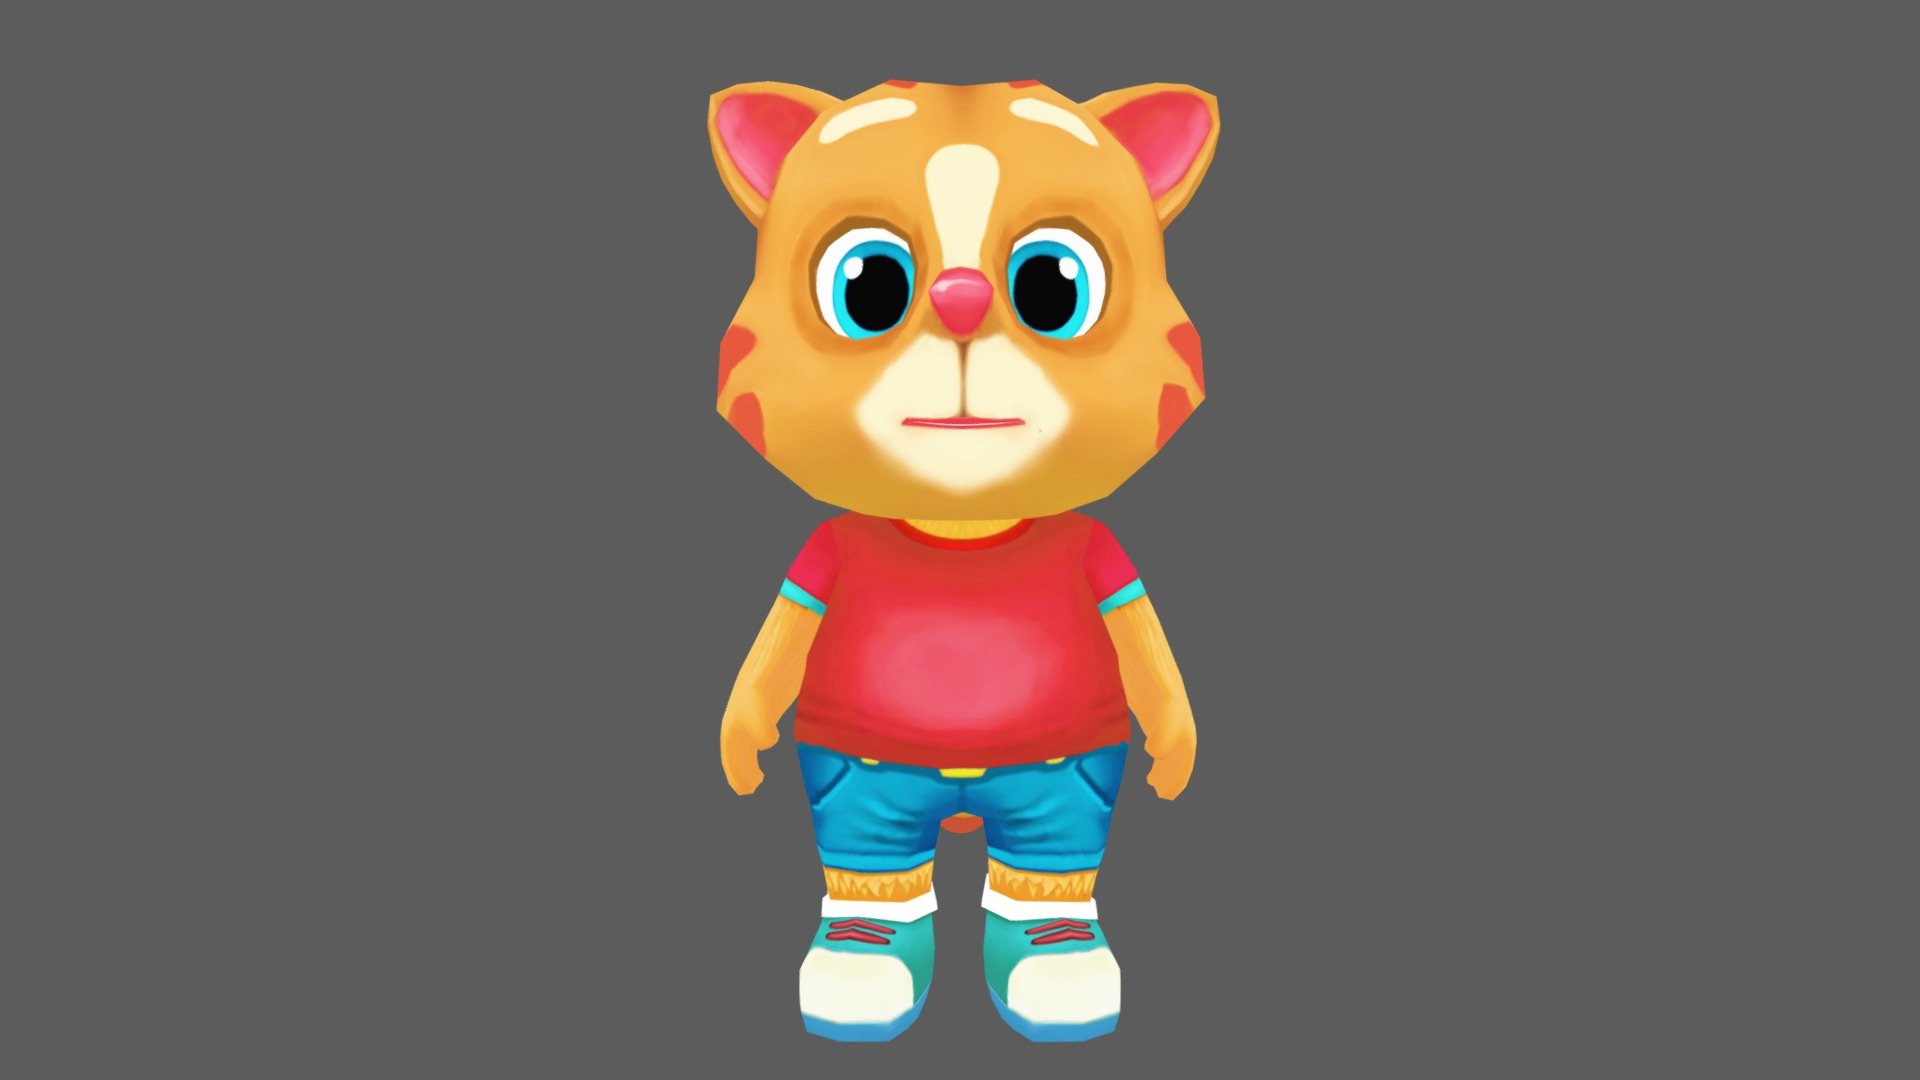 Cat character for games and animations. The model is game ready and compatible with game engines.

The model is low poly with four texture resolutions 4096x4096, 2048x2048, 1024x1024 &amp; 512x512.

Included Files:


Maya (.ma, .mb) - 2015 - 2019
FBX - 2014 - 2019
OBJ

The package includes 18 Animations which are as follows:


Run
Idle
Jump
Leap left
Leap right
Skidding
Roll
Crash &amp; Death
Power up
Whirl
Whirl jump
Waving in air
Backwards run
Dizzy
Gum Bubble
Gliding
Waving
Looking behind

The model is fully rigged and can be easily animated in case further animating or modification is required.

The model is game ready at:


3408 Polygons
3392 Vertices

The model is UV mapped with non-overlapping UV's. The shadows and lights are baked in the texture, although you can add more lights and shadows for rendering and use it as you please 3d model